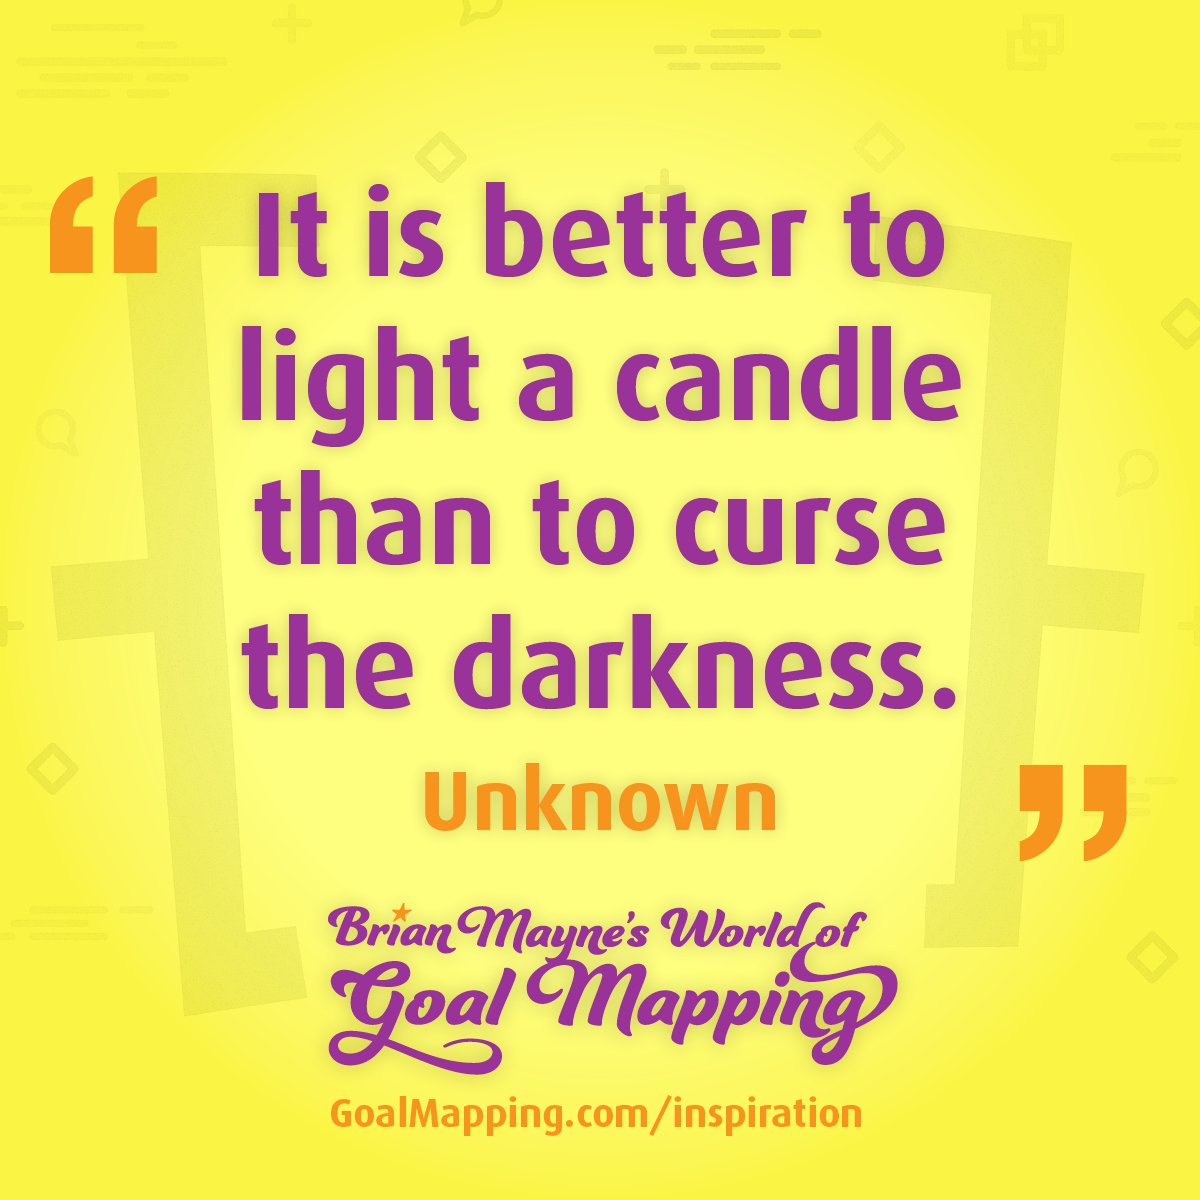 "It is better to light a candle than to curse the darkness." Unknown